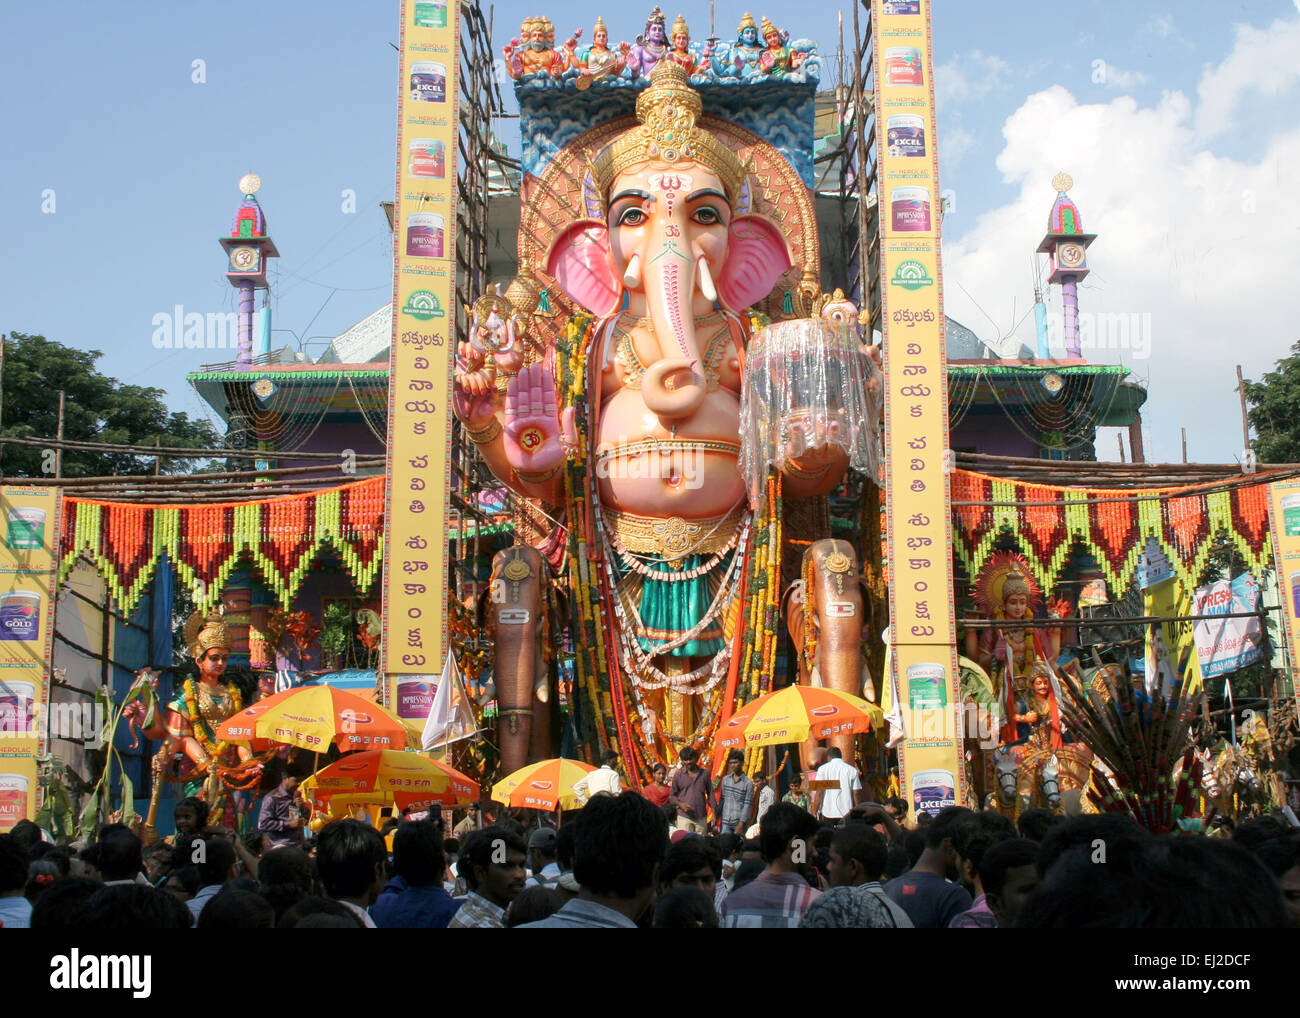 People pray to 58 feet high Lord Ganesh idol, at Khairatabad, during Hindu festival on September 28,2012 in Hyderabad,India. Stock Photo